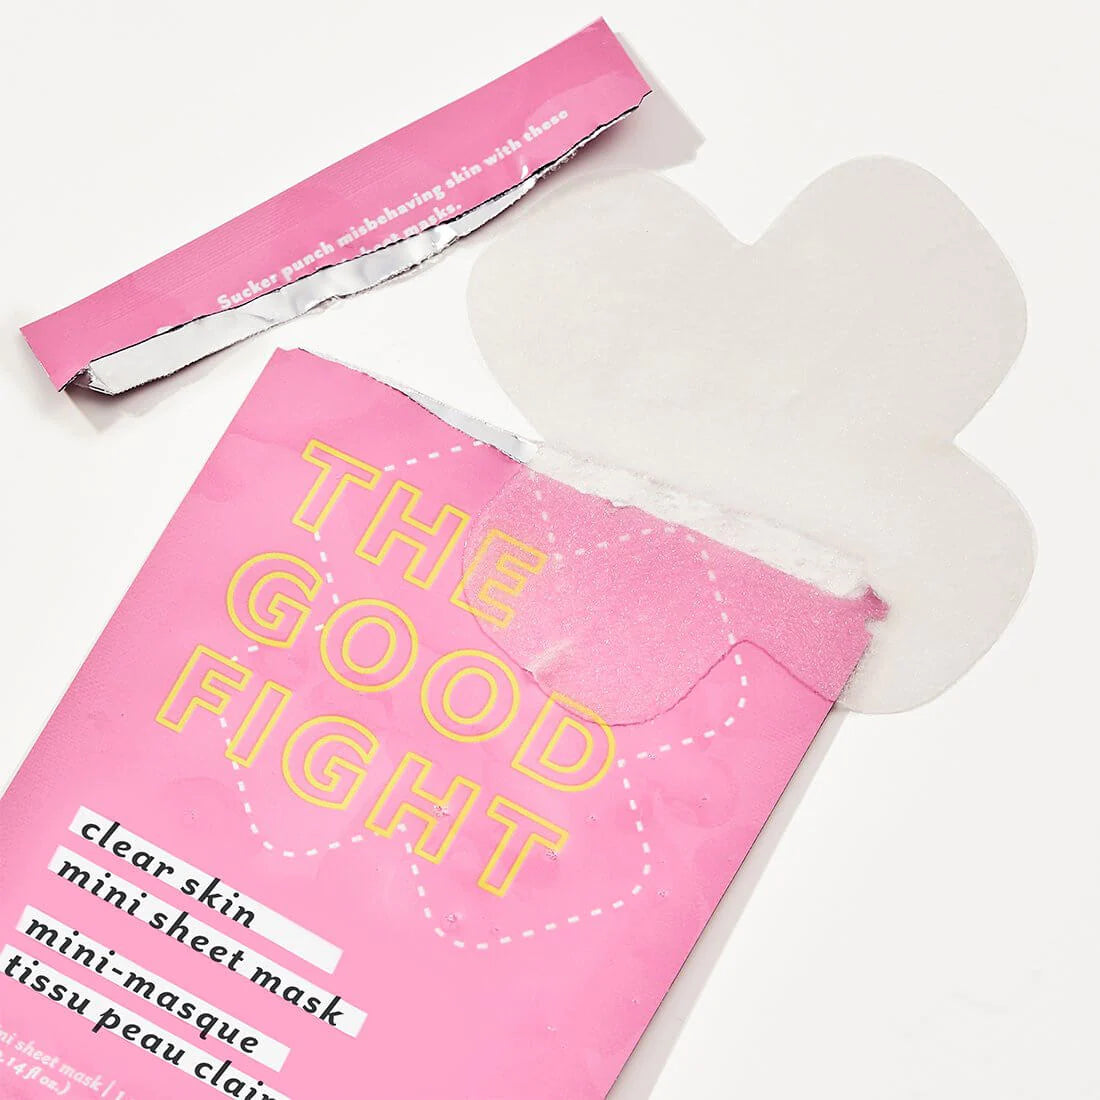 THE GOOD FIGHT Clear Skin Sheet Mask